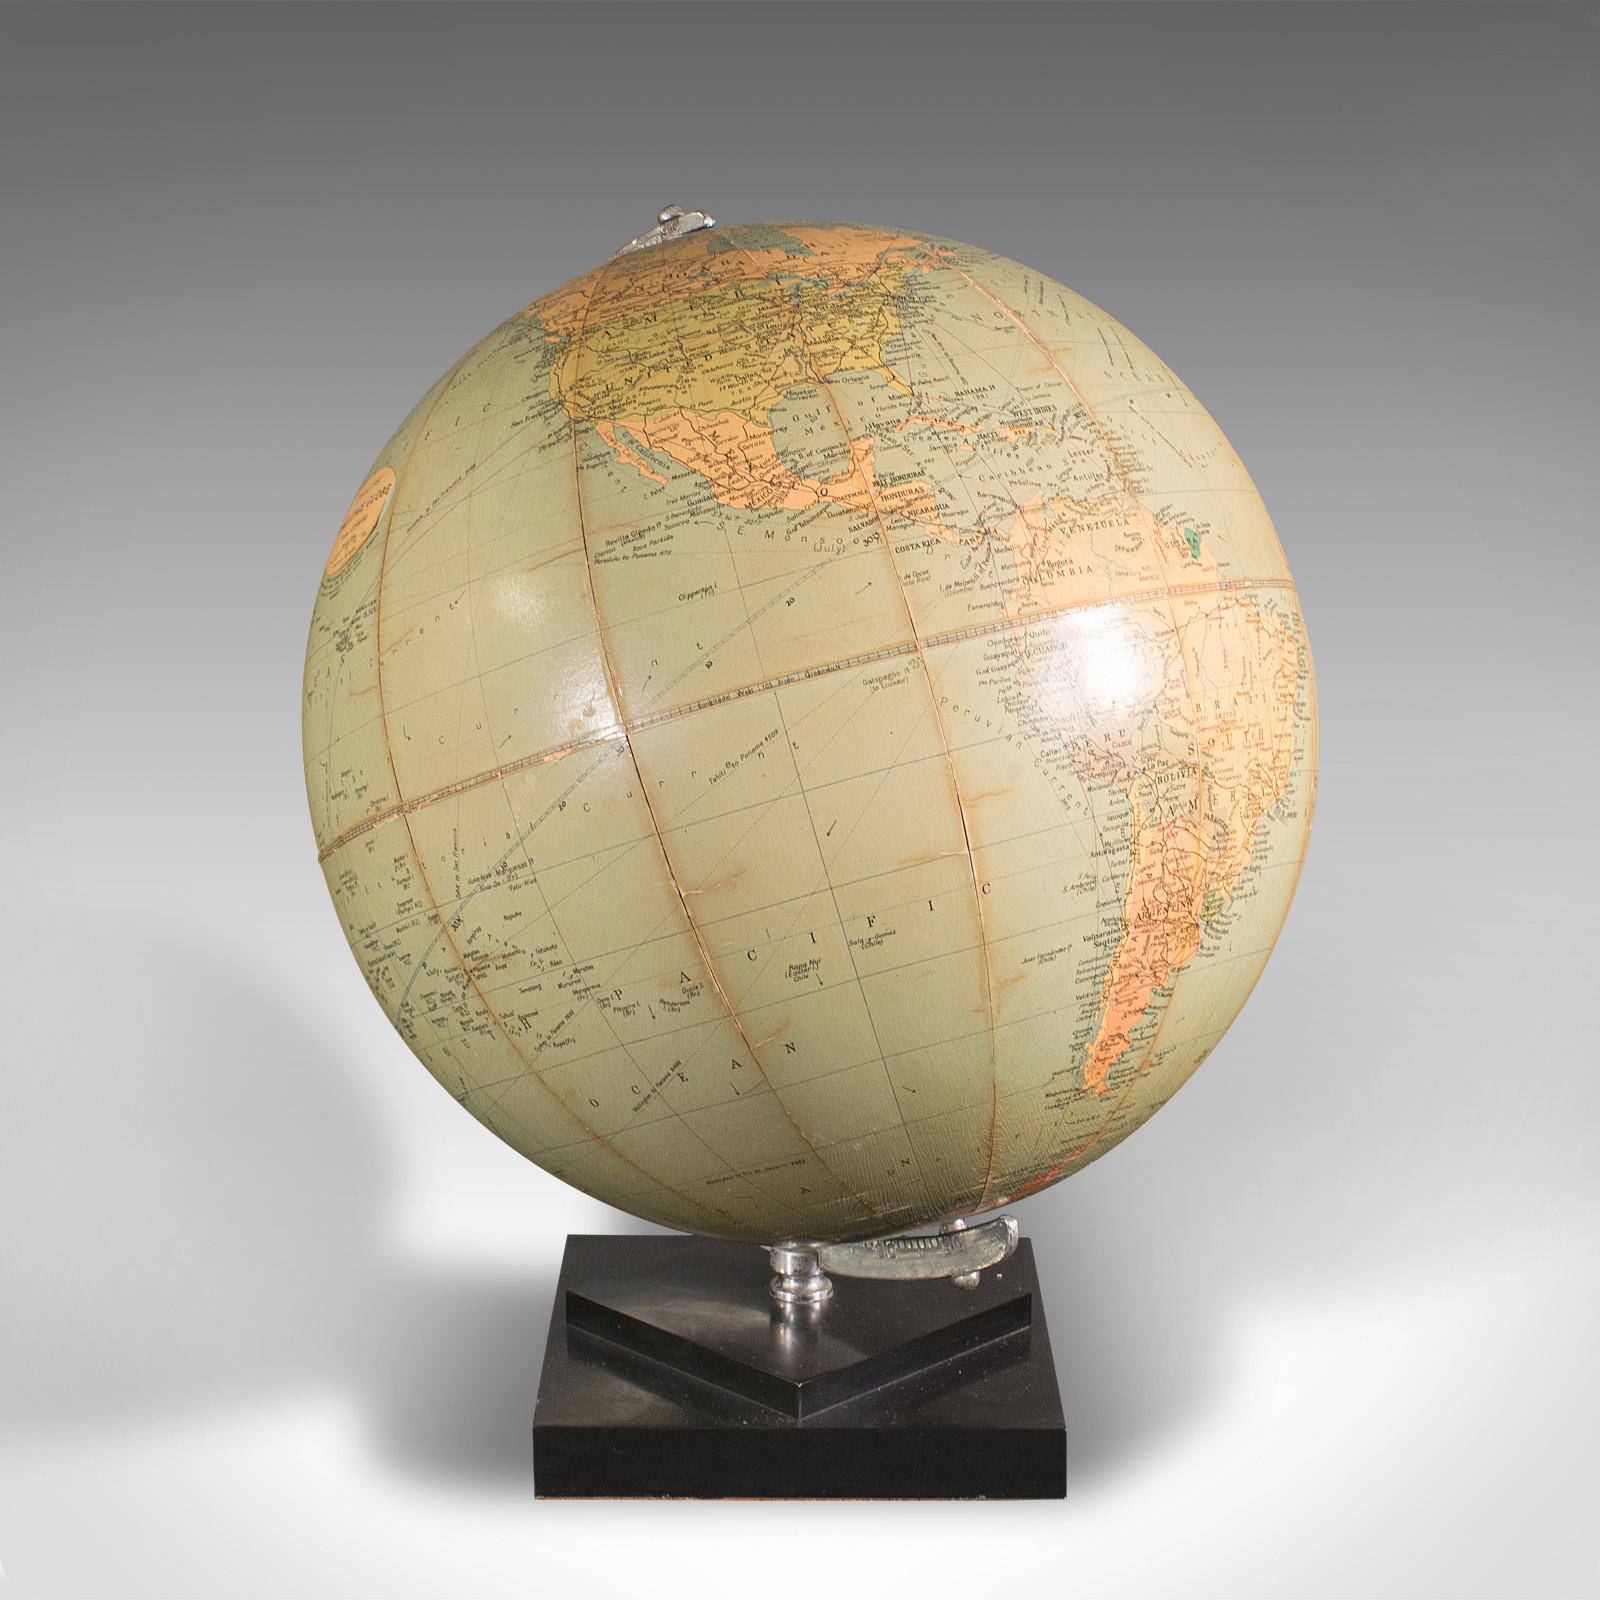 This is a vintage table globe. An English, paper finished world map with chrome meridian, dating to the mid 20th century, circa 1960.

Fascinating mid-century globe with a delightful level of detail
Displays a desirable aged patina throughout
Globe